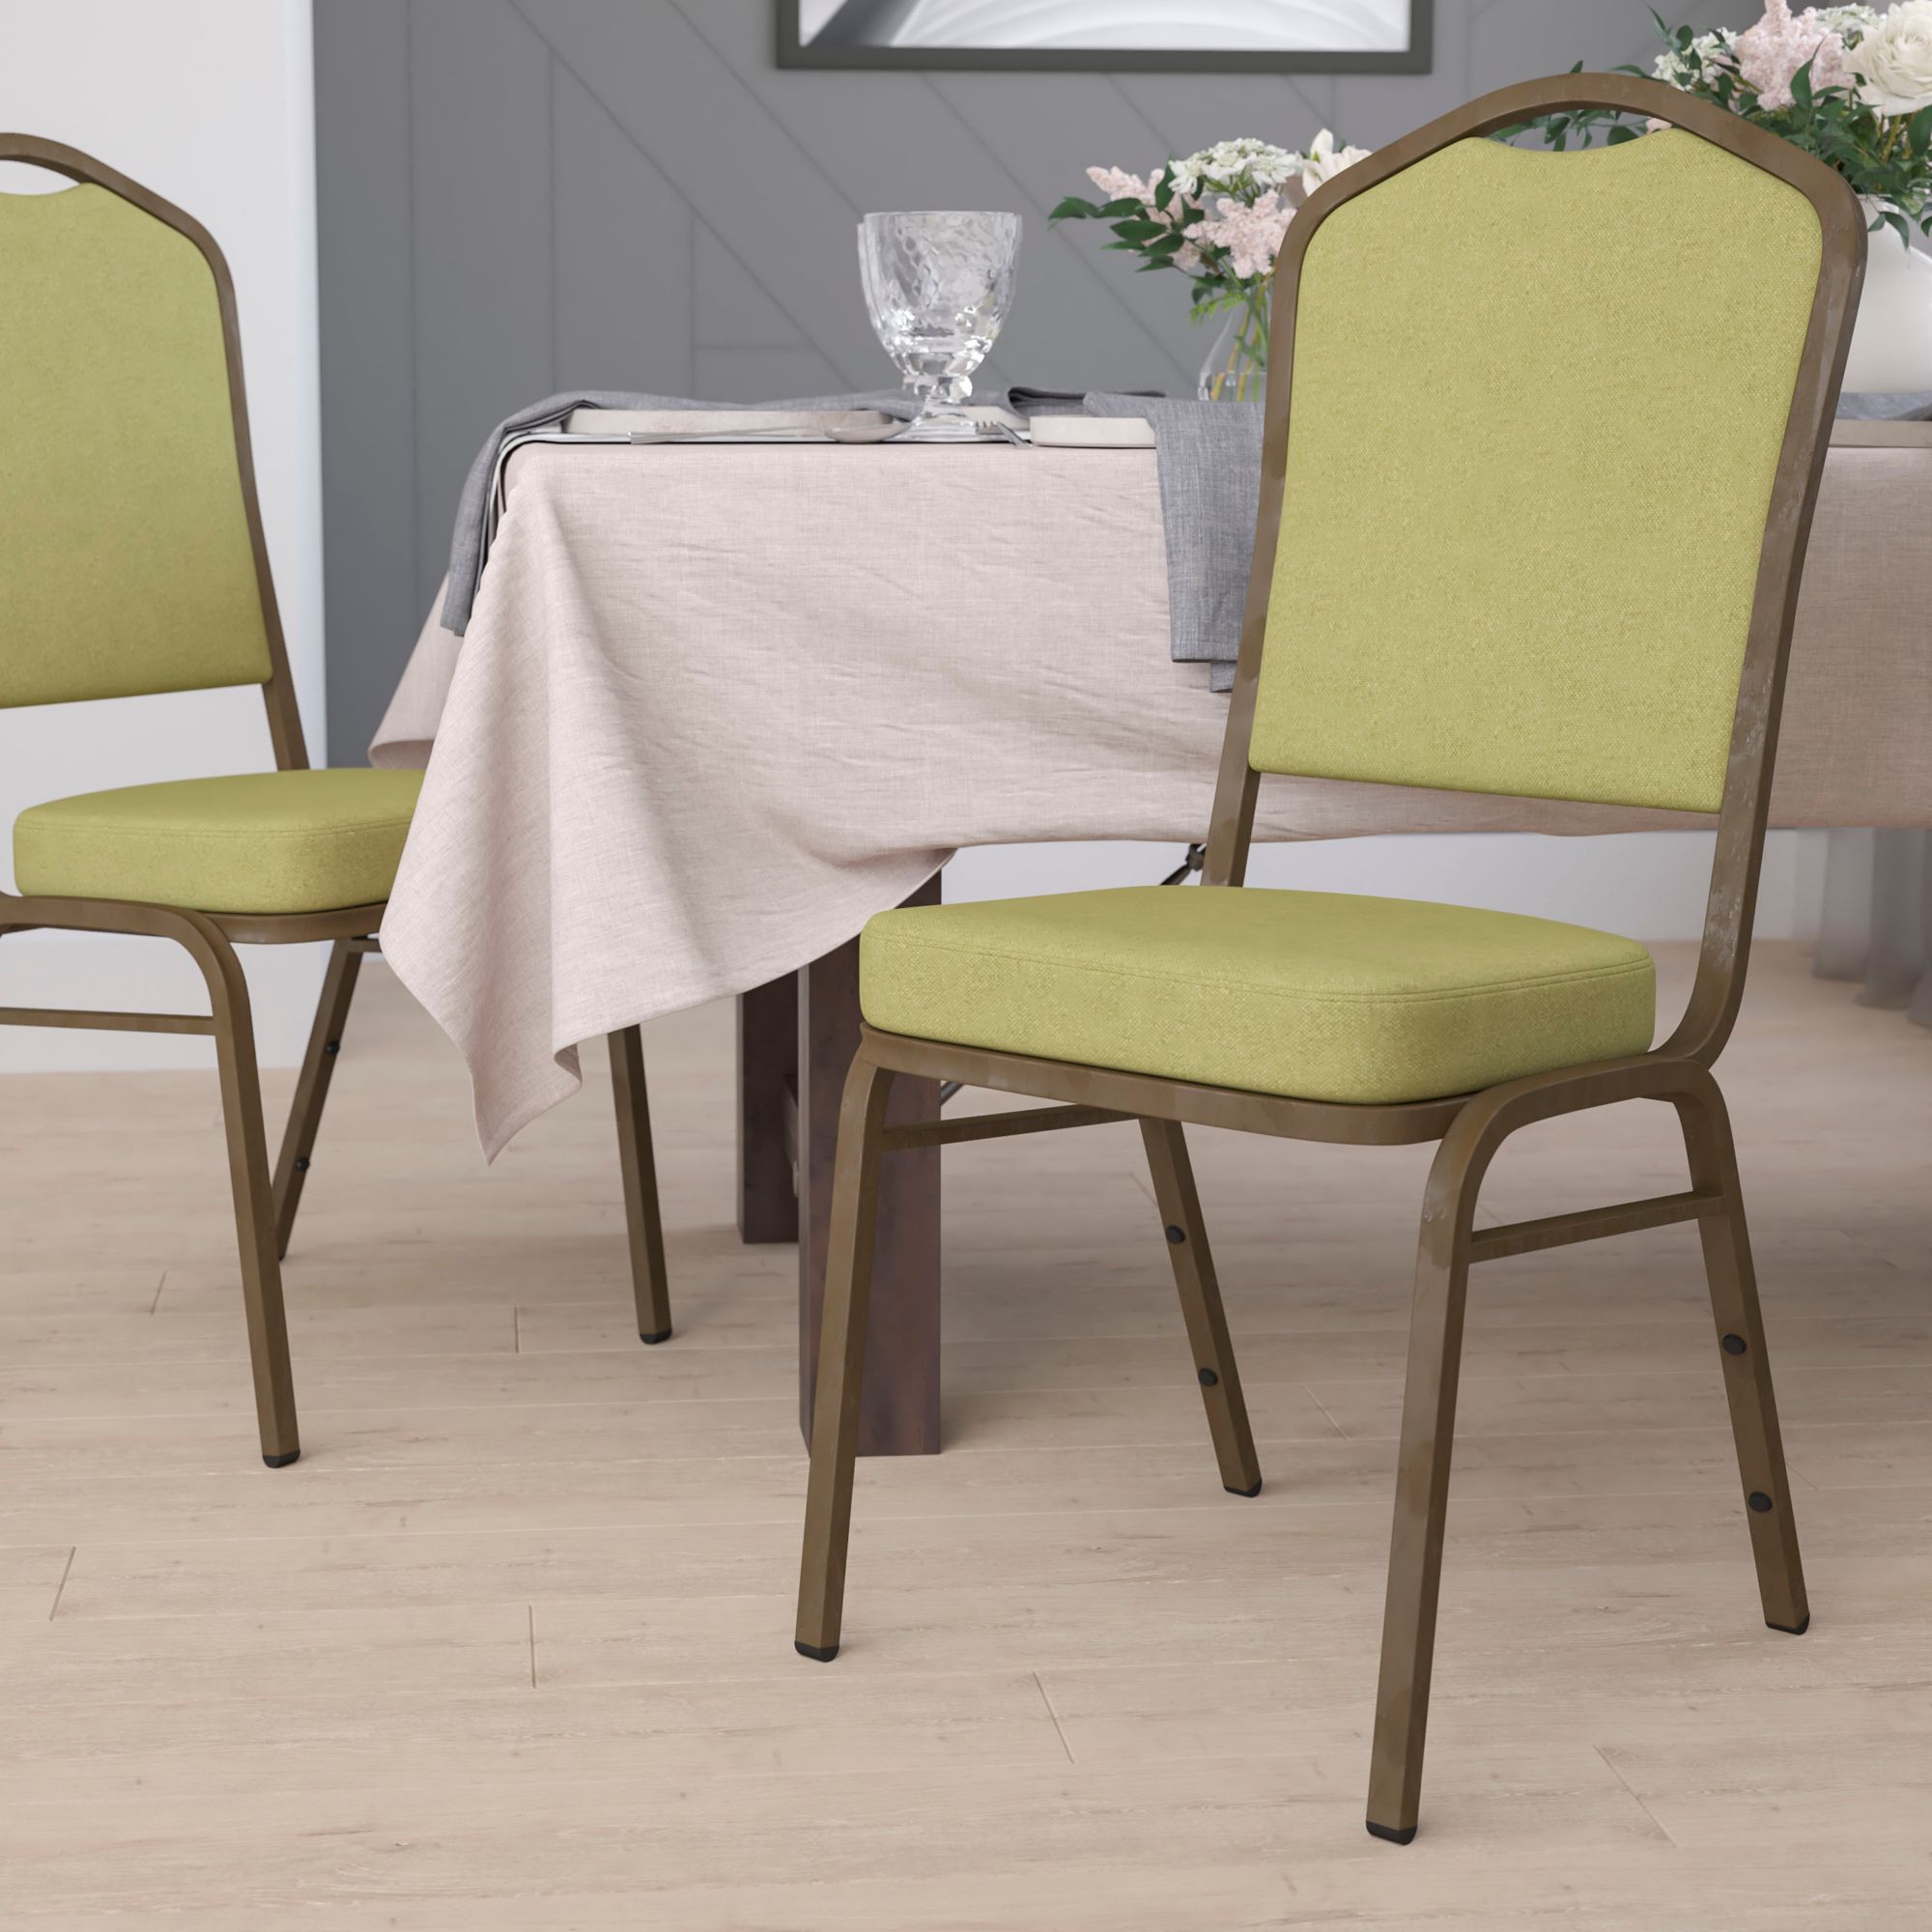 bedbathandbeyond.com | Emma + Oliver Crown Back Stacking Banquet Chair in Moss Fabric - Gold Vein Frame